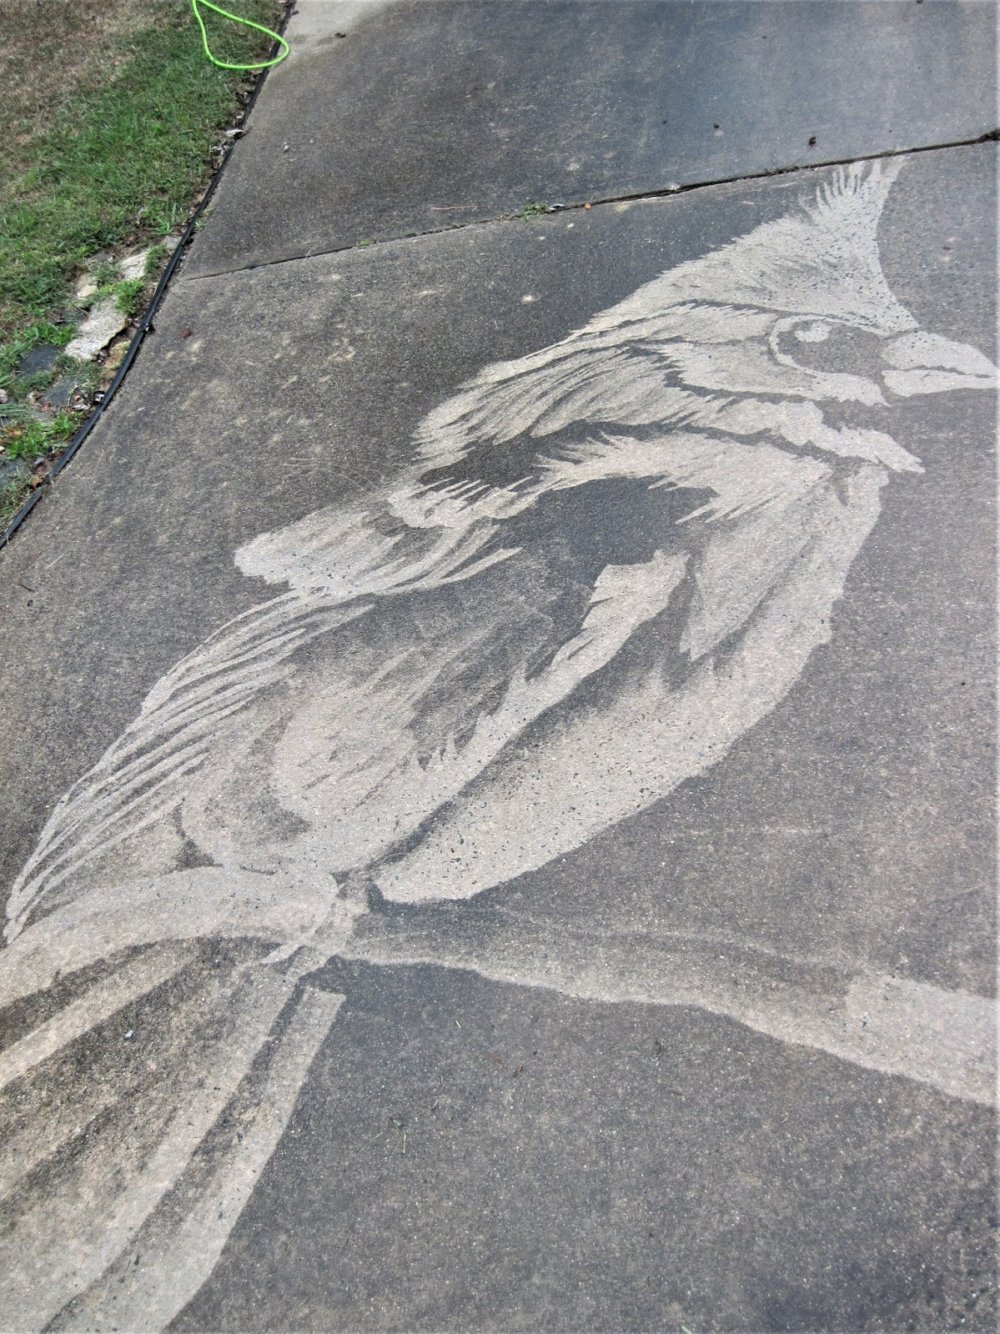 Gorgeous Figures Painted With A Power Washer On Dirty Driveways By Dianna Wood 1